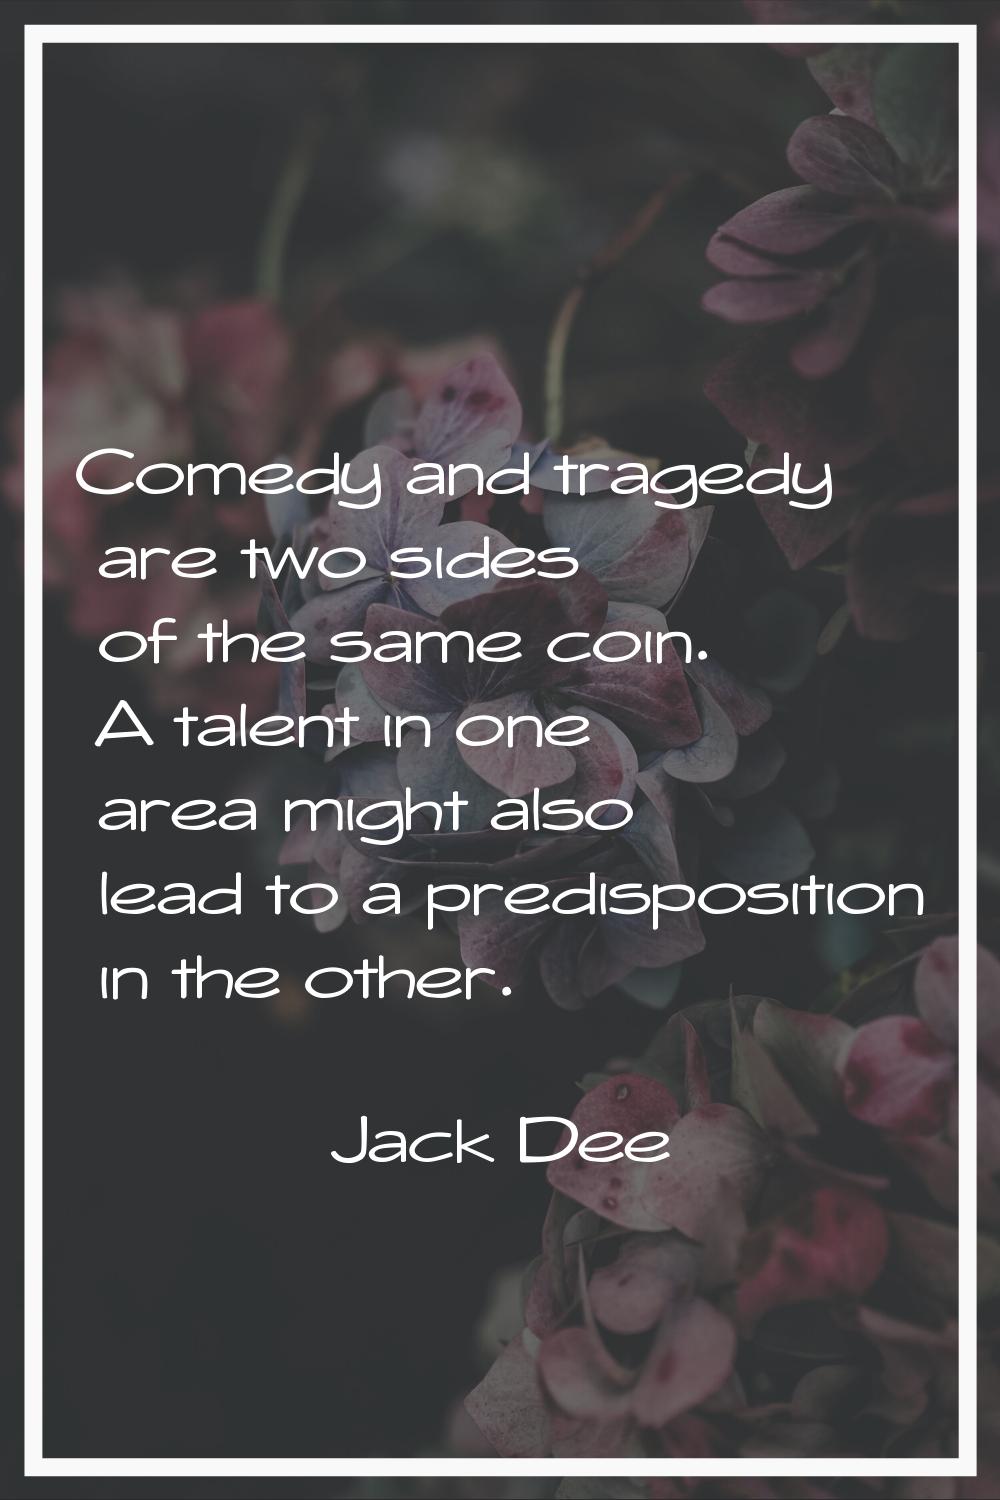 Comedy and tragedy are two sides of the same coin. A talent in one area might also lead to a predis